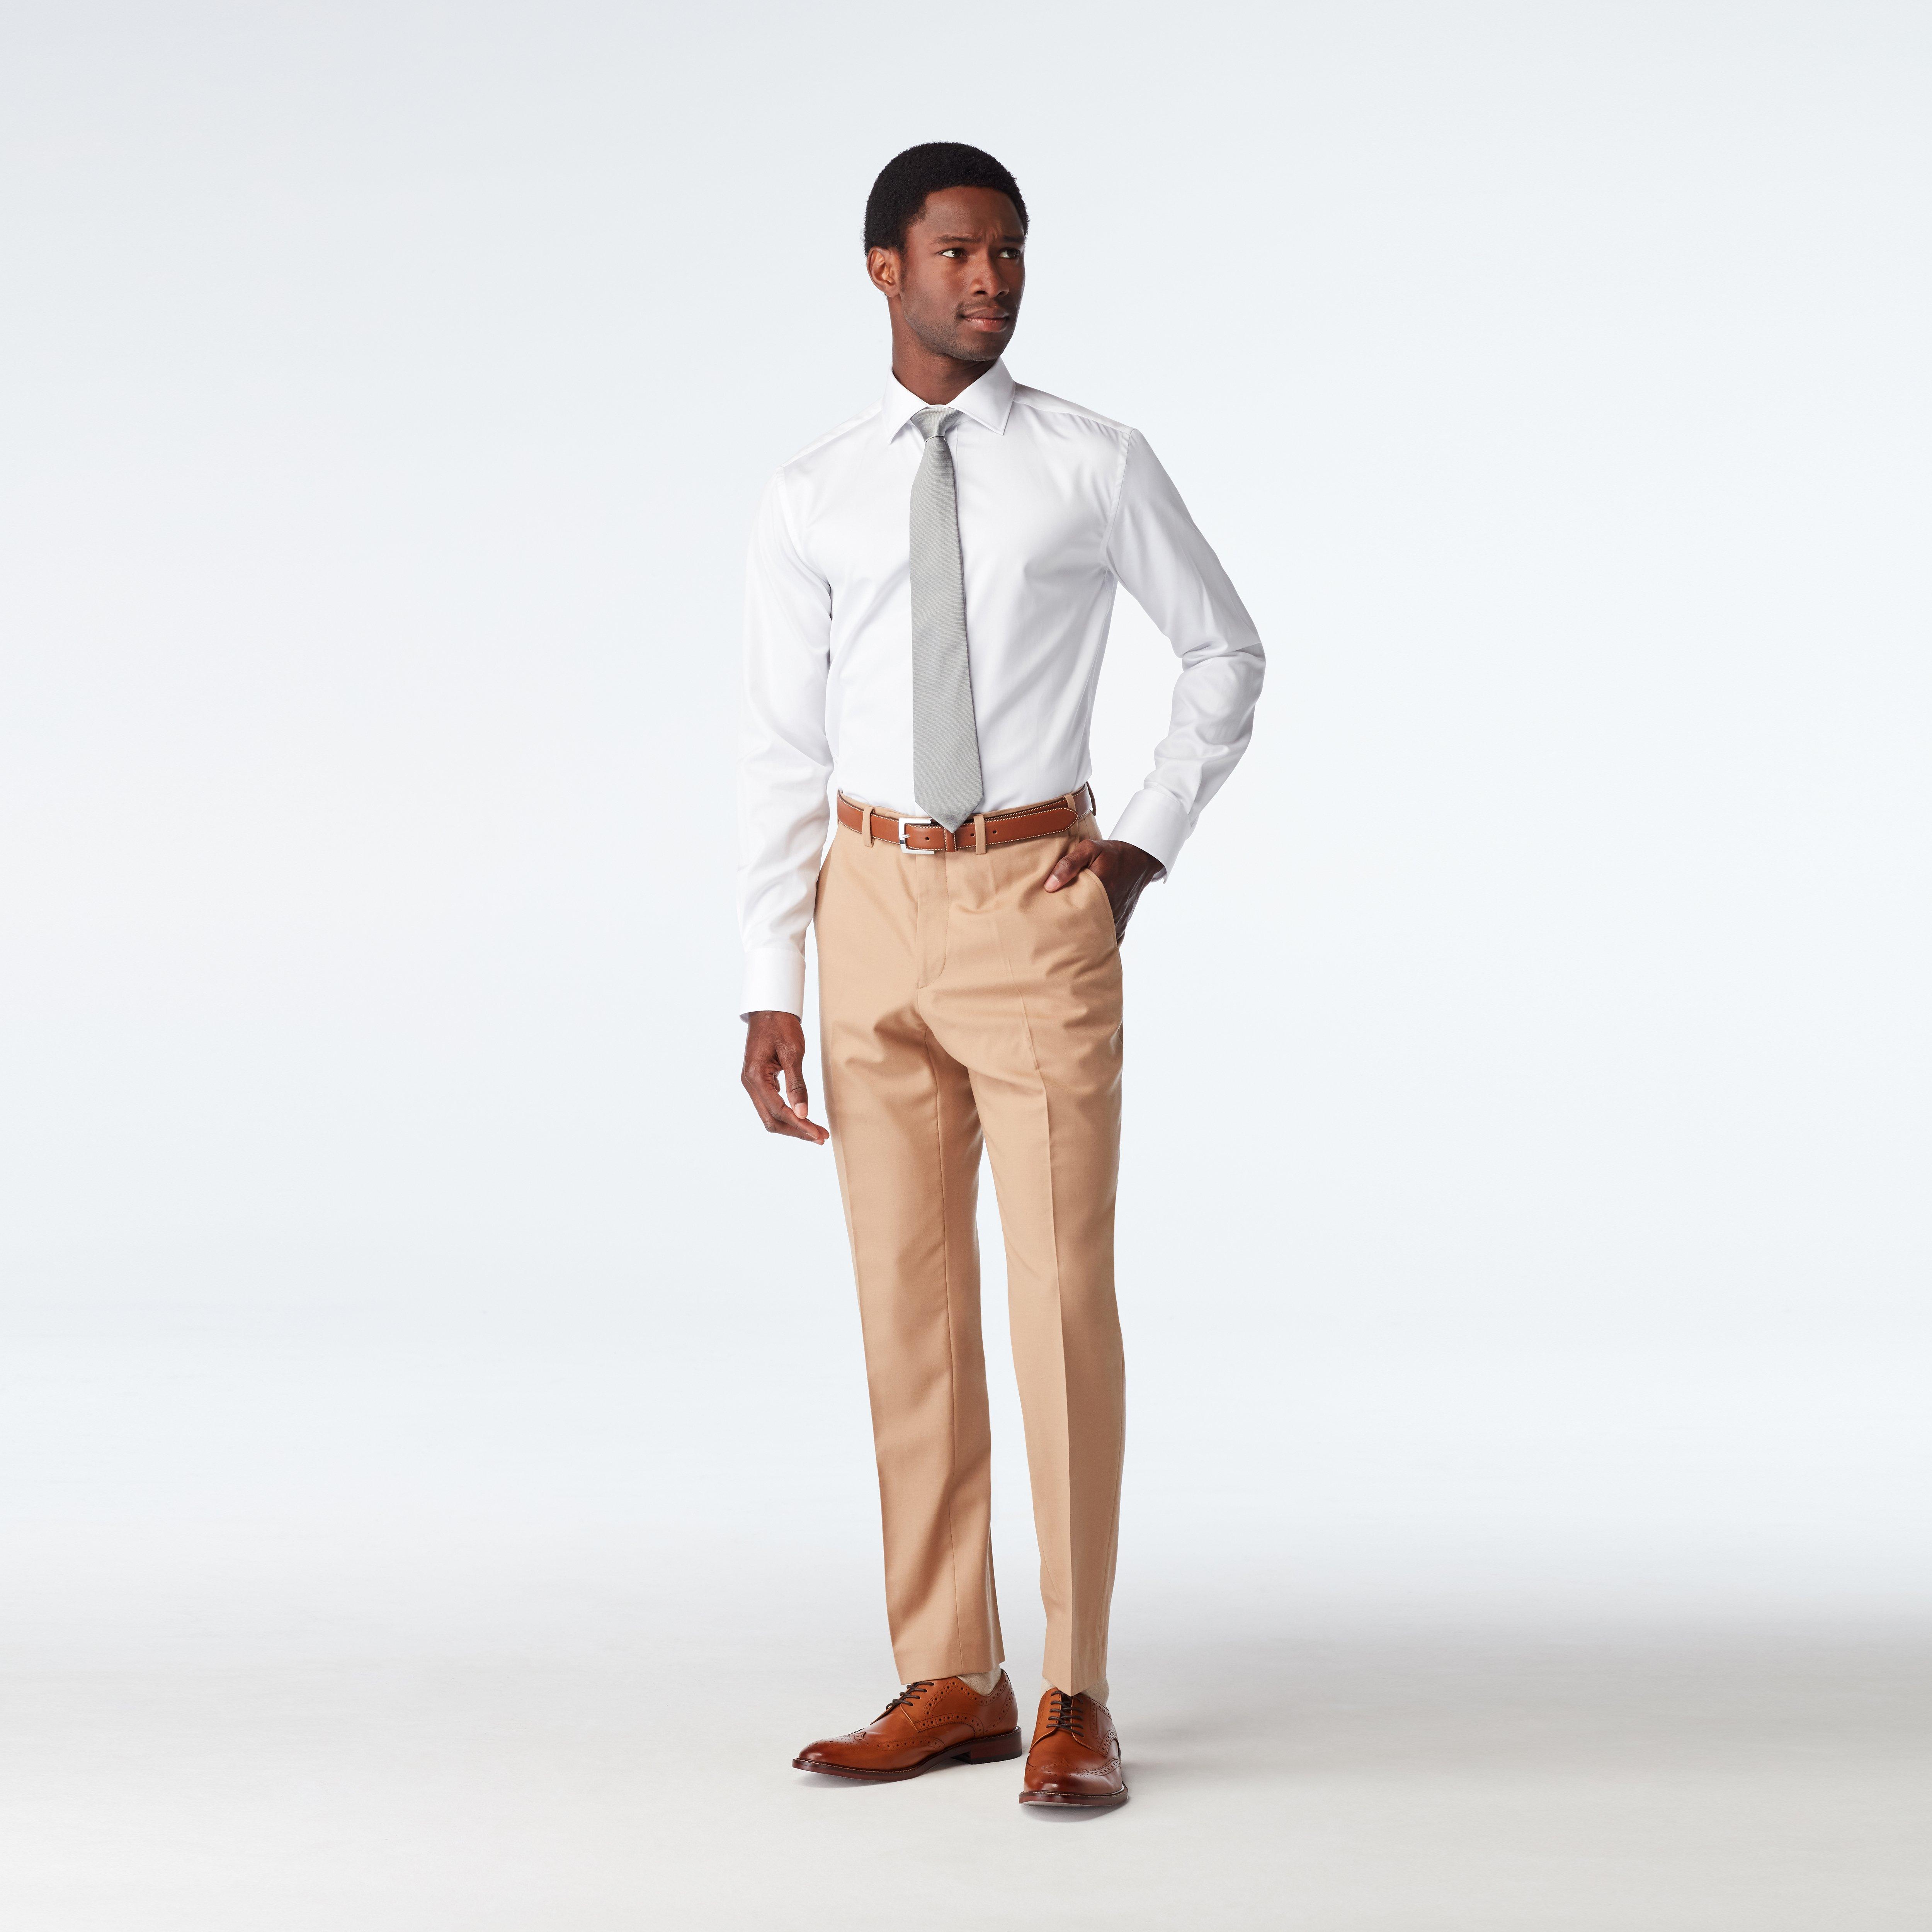 Custom Suits Made For You - Hayward Flannel Camel Suit | INDOCHINO